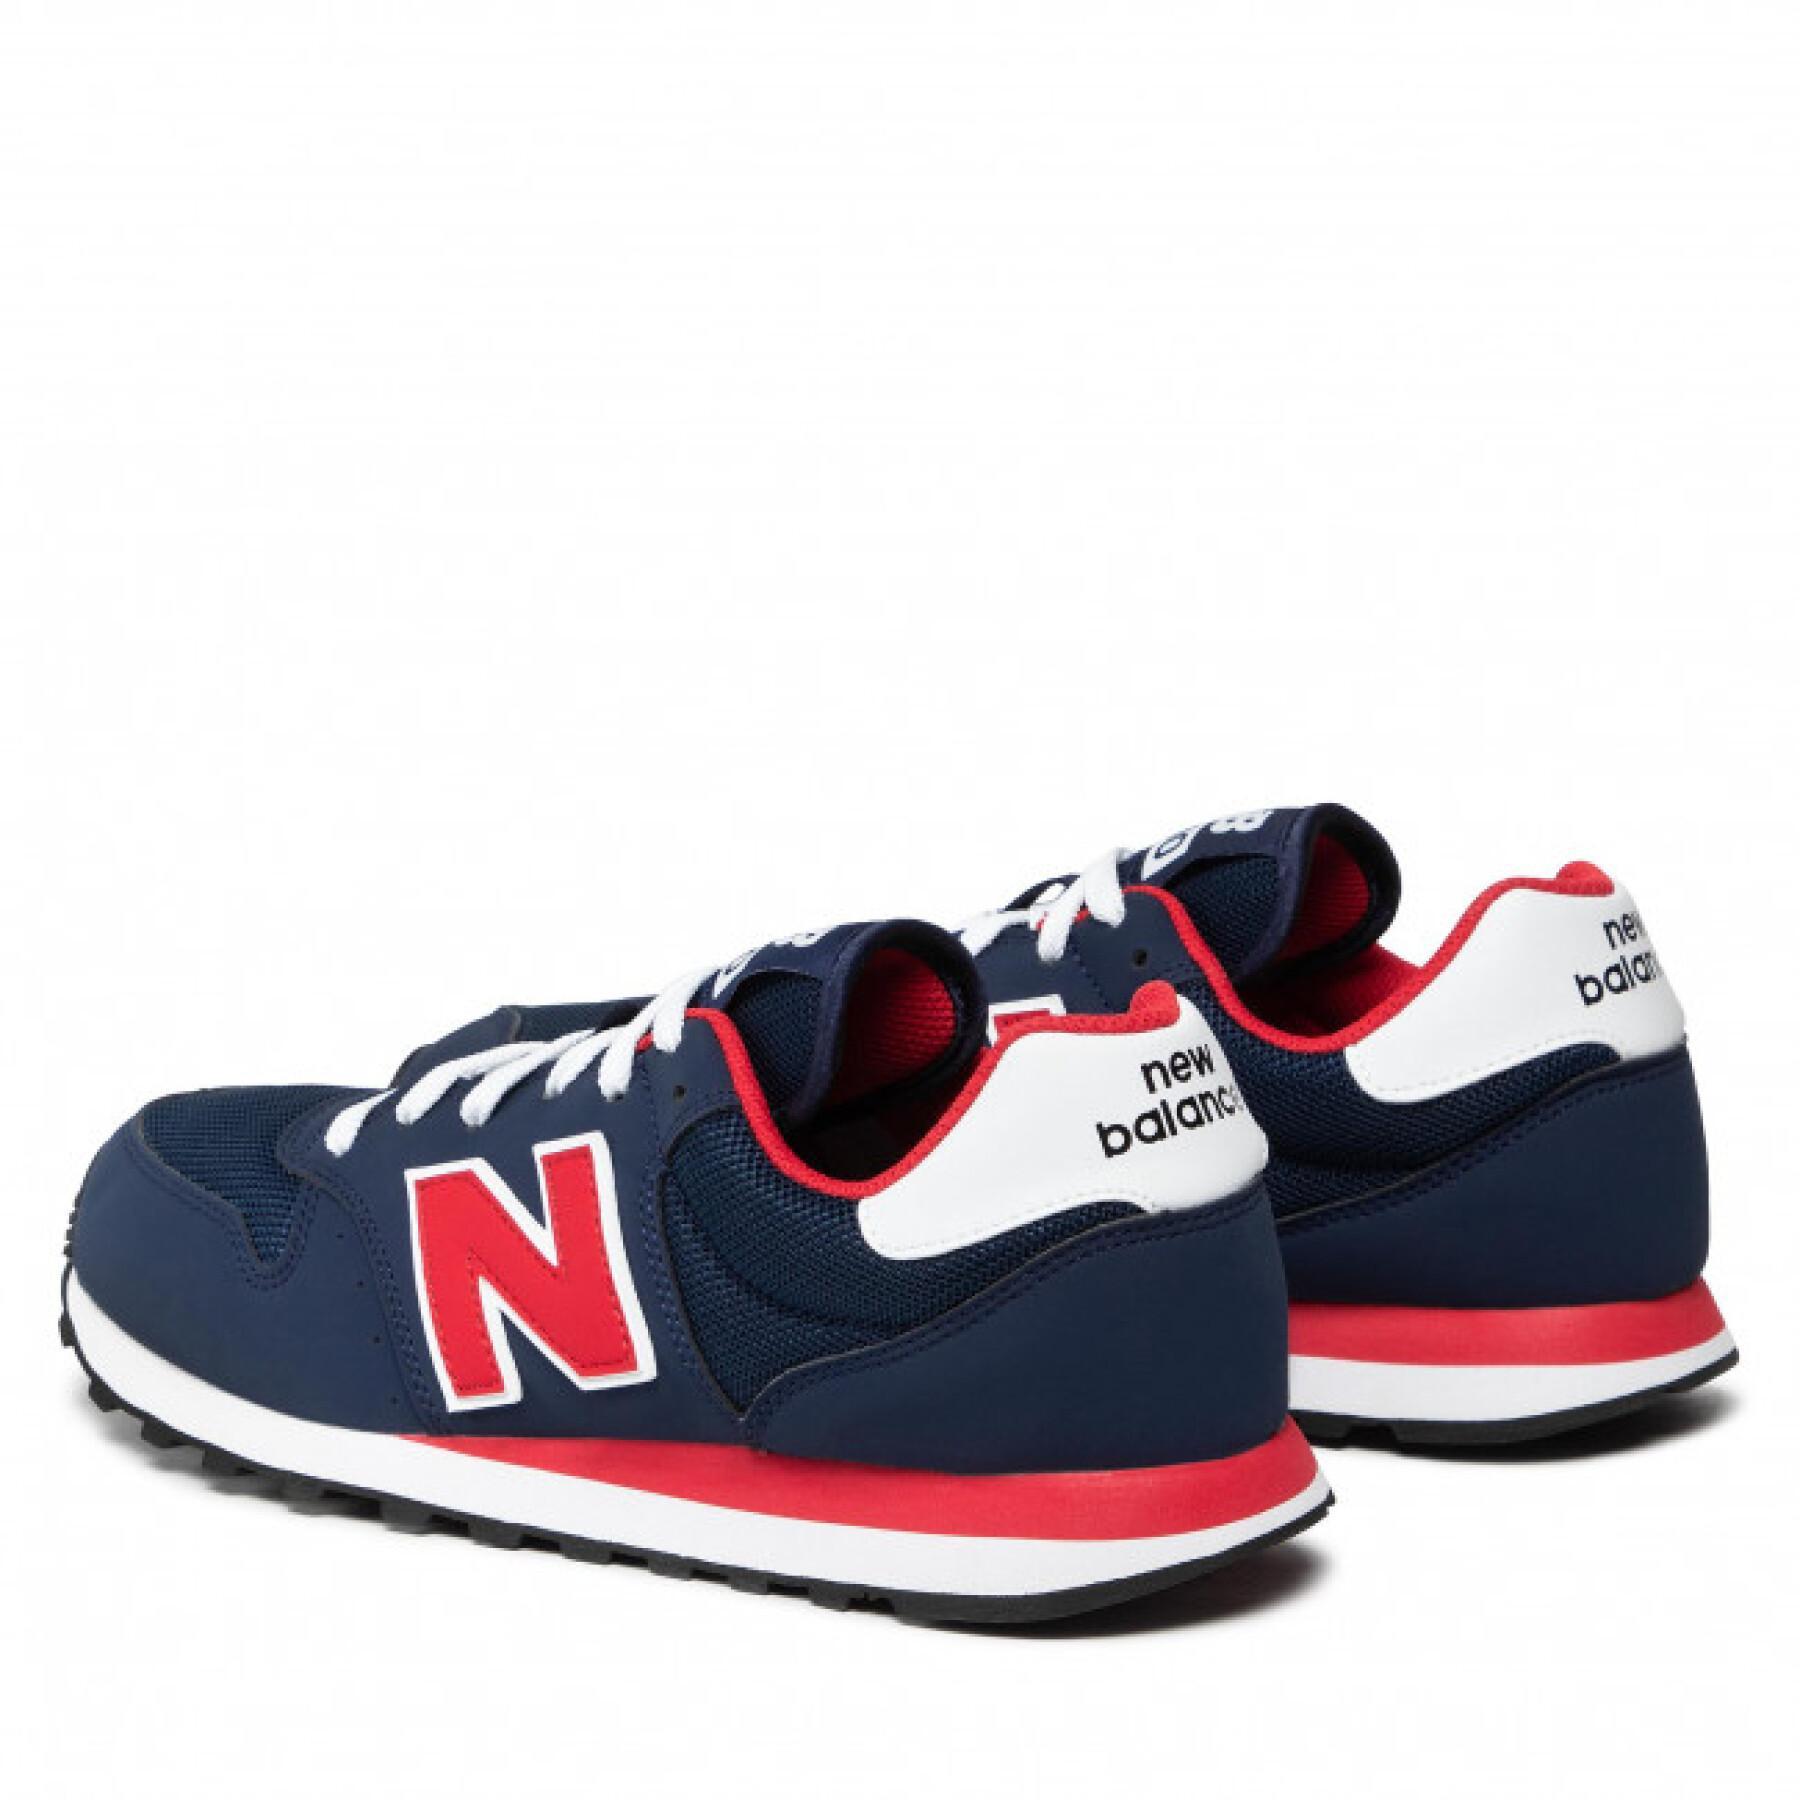 Formadores New Balance 500 Classic